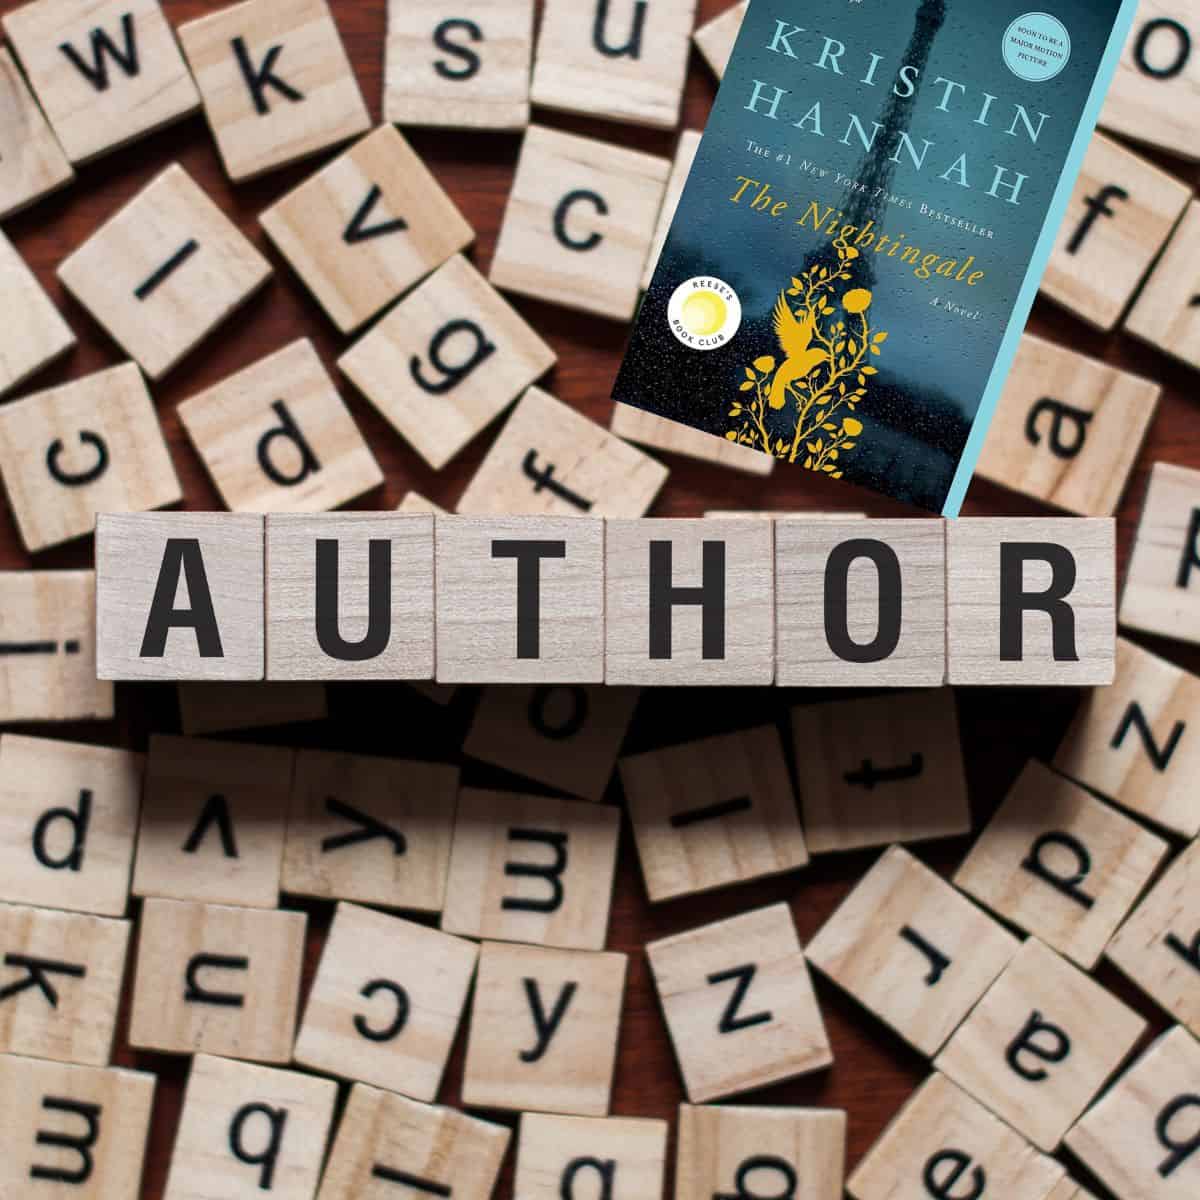 scrabble tiles spelling author with the nightingale by kristin hannah.